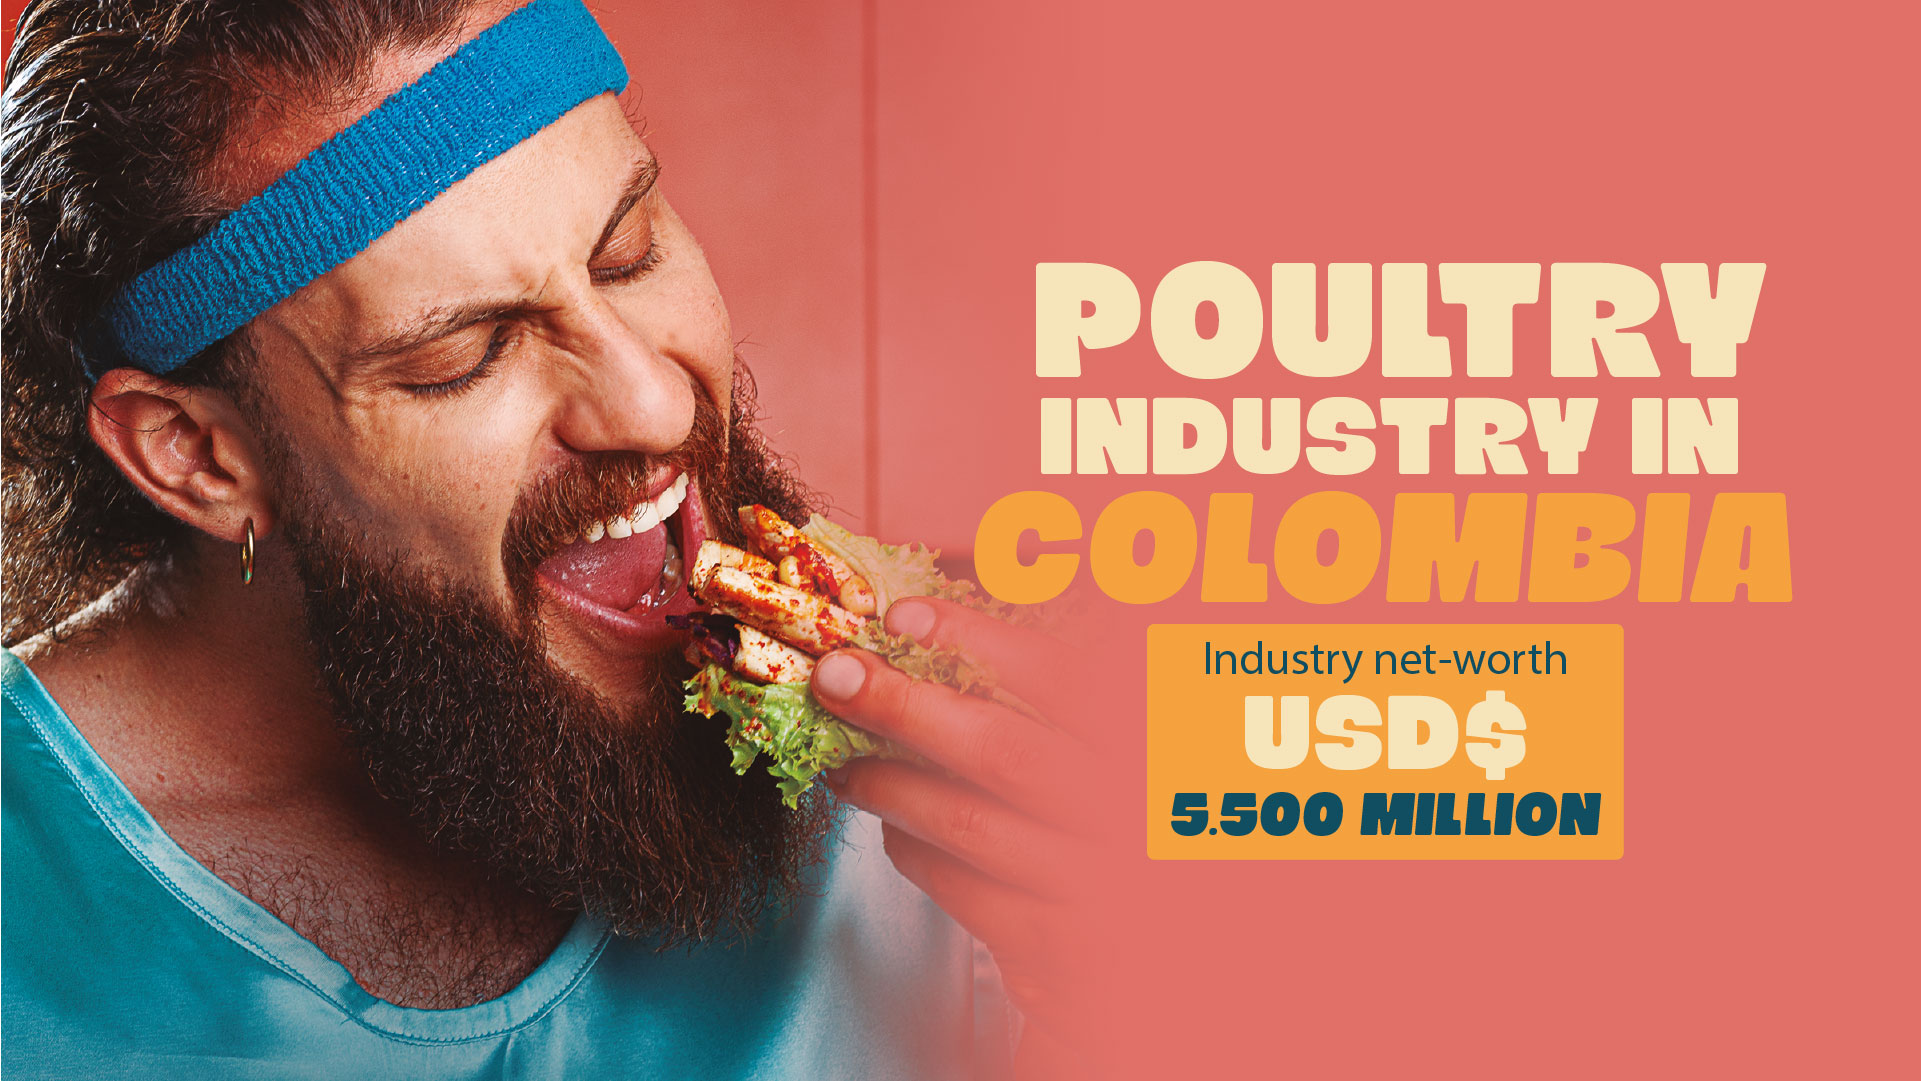 Poultry industry in Colombia use net worth 5500 million dollars